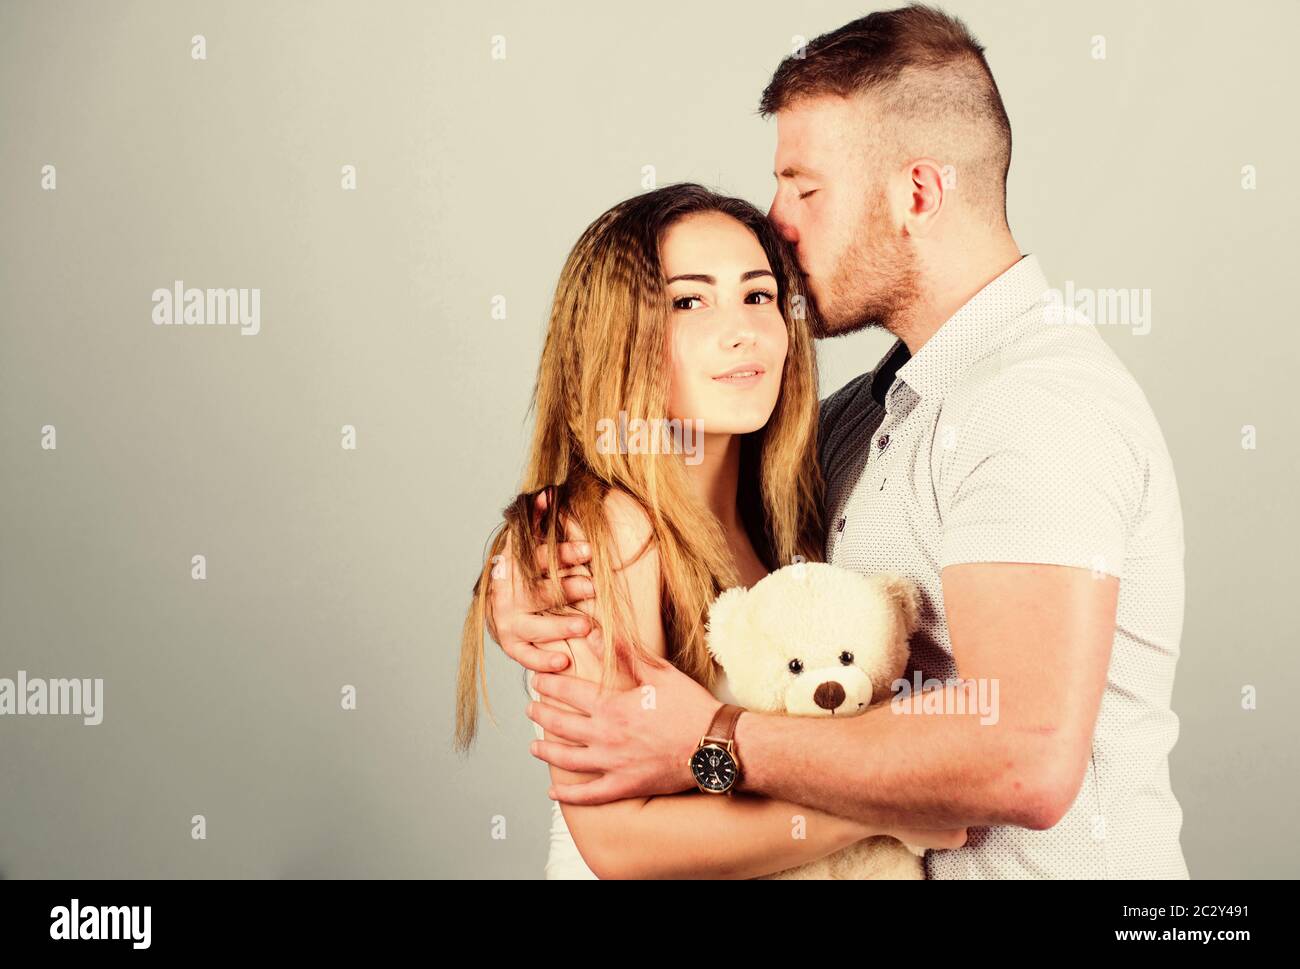 Enjoying each other. Happy family. Valentines day holiday. Soft toy teddy bear gift. Man and woman couple in love. Family love. Romantic surprise picture picture